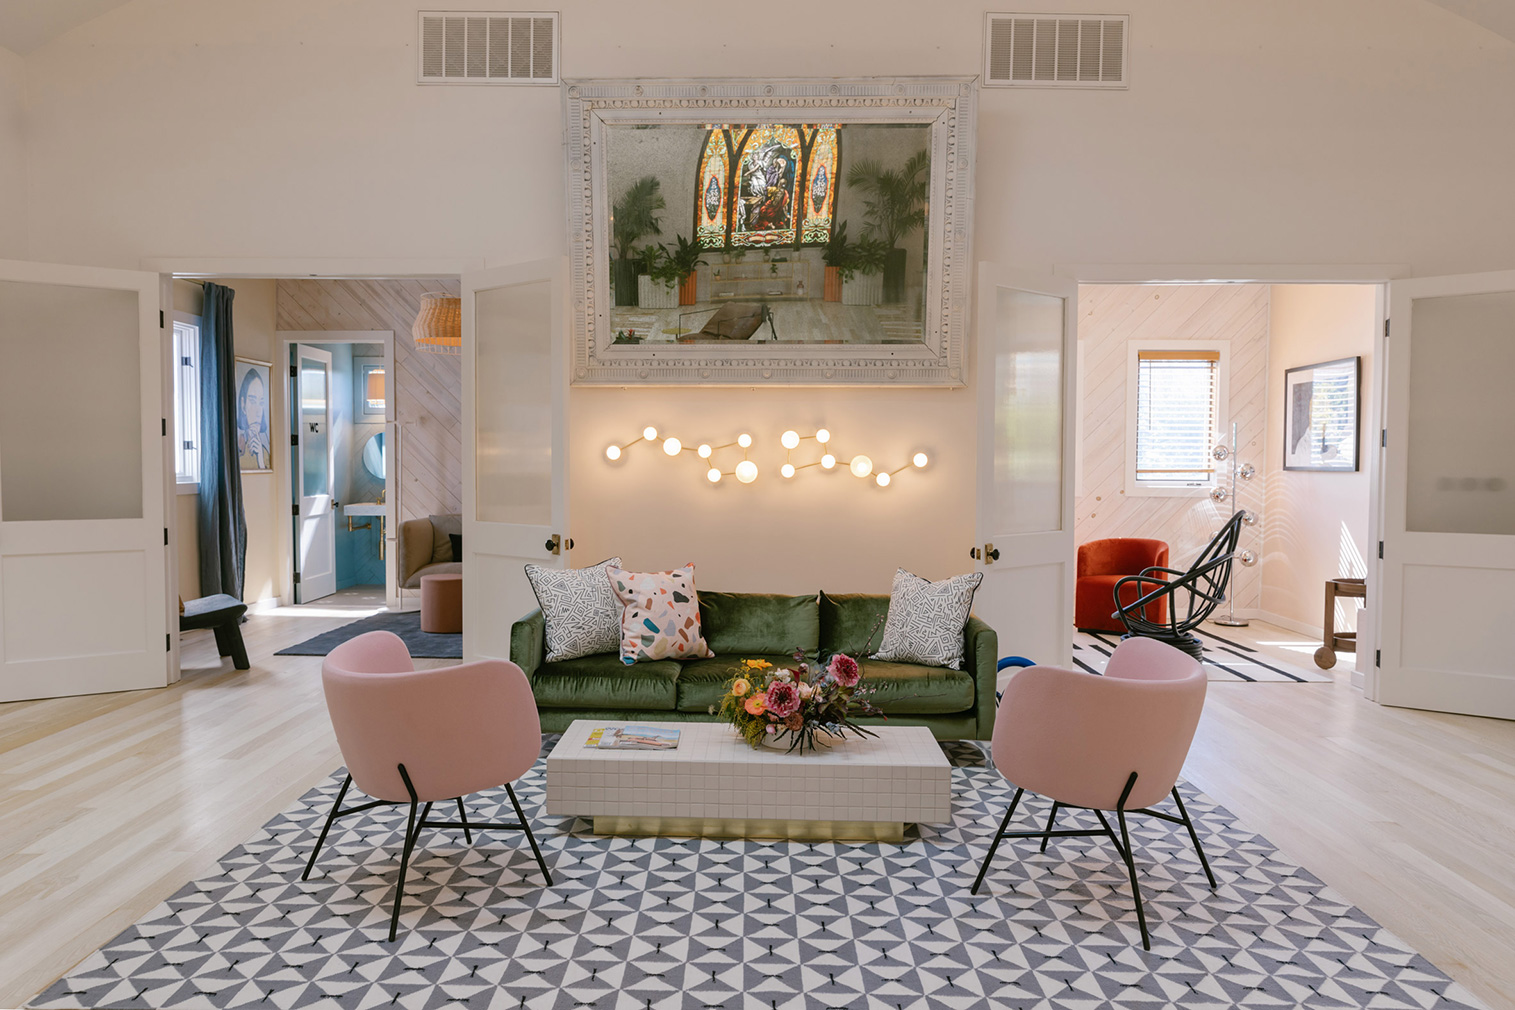 This former LA church is now a worshipful new coworking space